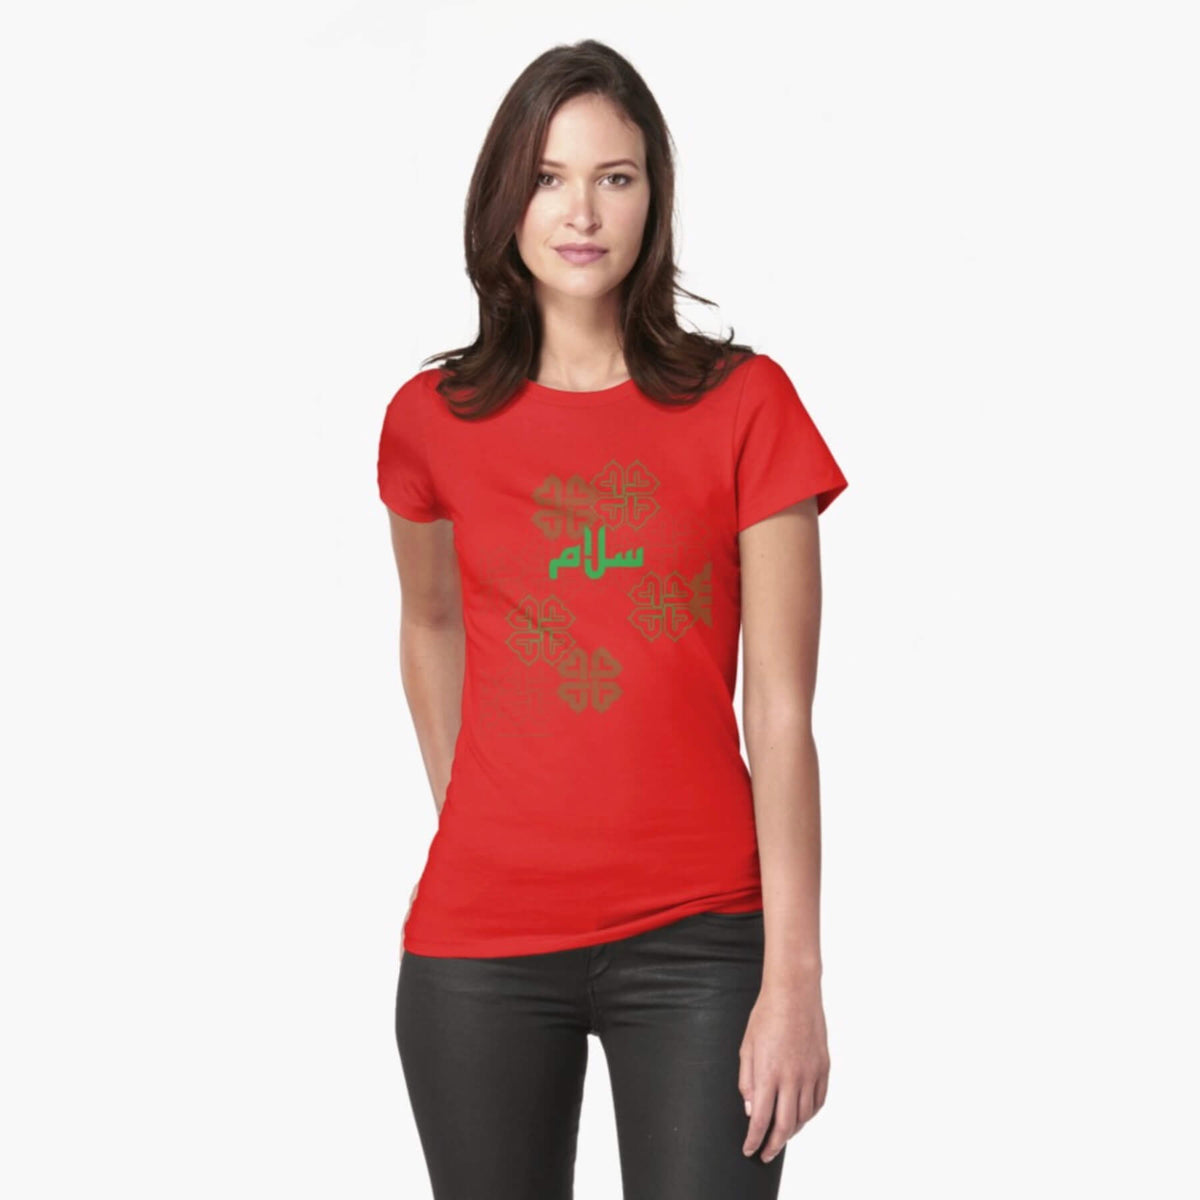 A white female model with hazel eyes and mid-brown shoulder length hair wears the Haluna Happy Names exclusive &#39;Salaam—Arabic Key Words&#39; design bright red loosely fitted t-shirt and a pair of tight black jeans. The word &#39;salaam&#39; is written on the tshirt in green in Arabic using a kufic-style font, across the chest of the model against a complementary green patterned background print. The tshirt ends at the woman&#39;s hips and the image cuts off mid-thigh.